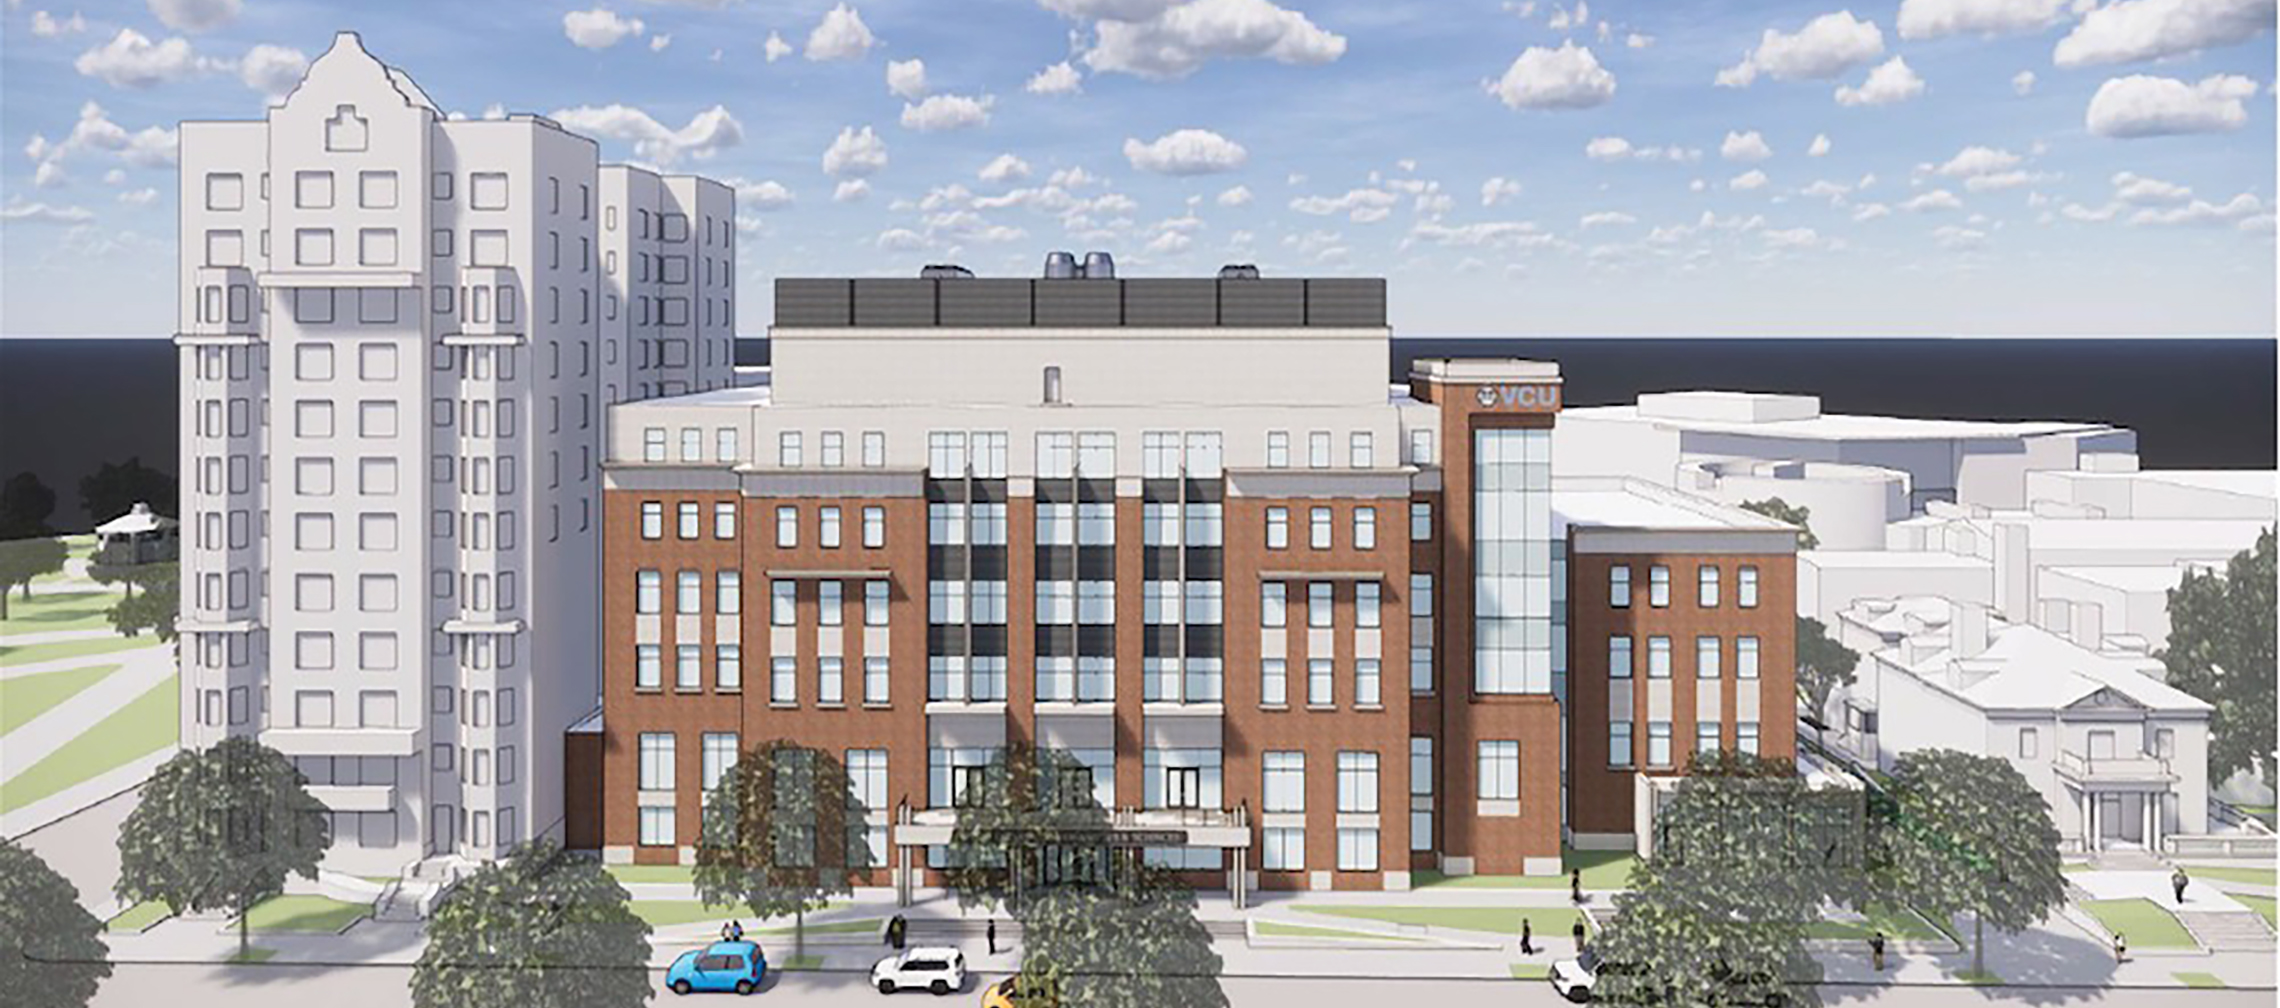 The state approved funding for VCU to construct a 168,000-square-foot, six-floor building dedicated to science, technology, engineering and math education on the Monroe Park Campus. The building, which will house lab, classroom and office space for the College of Humanities and Sciences, will be built at the site of the former Franklin Street Gym.